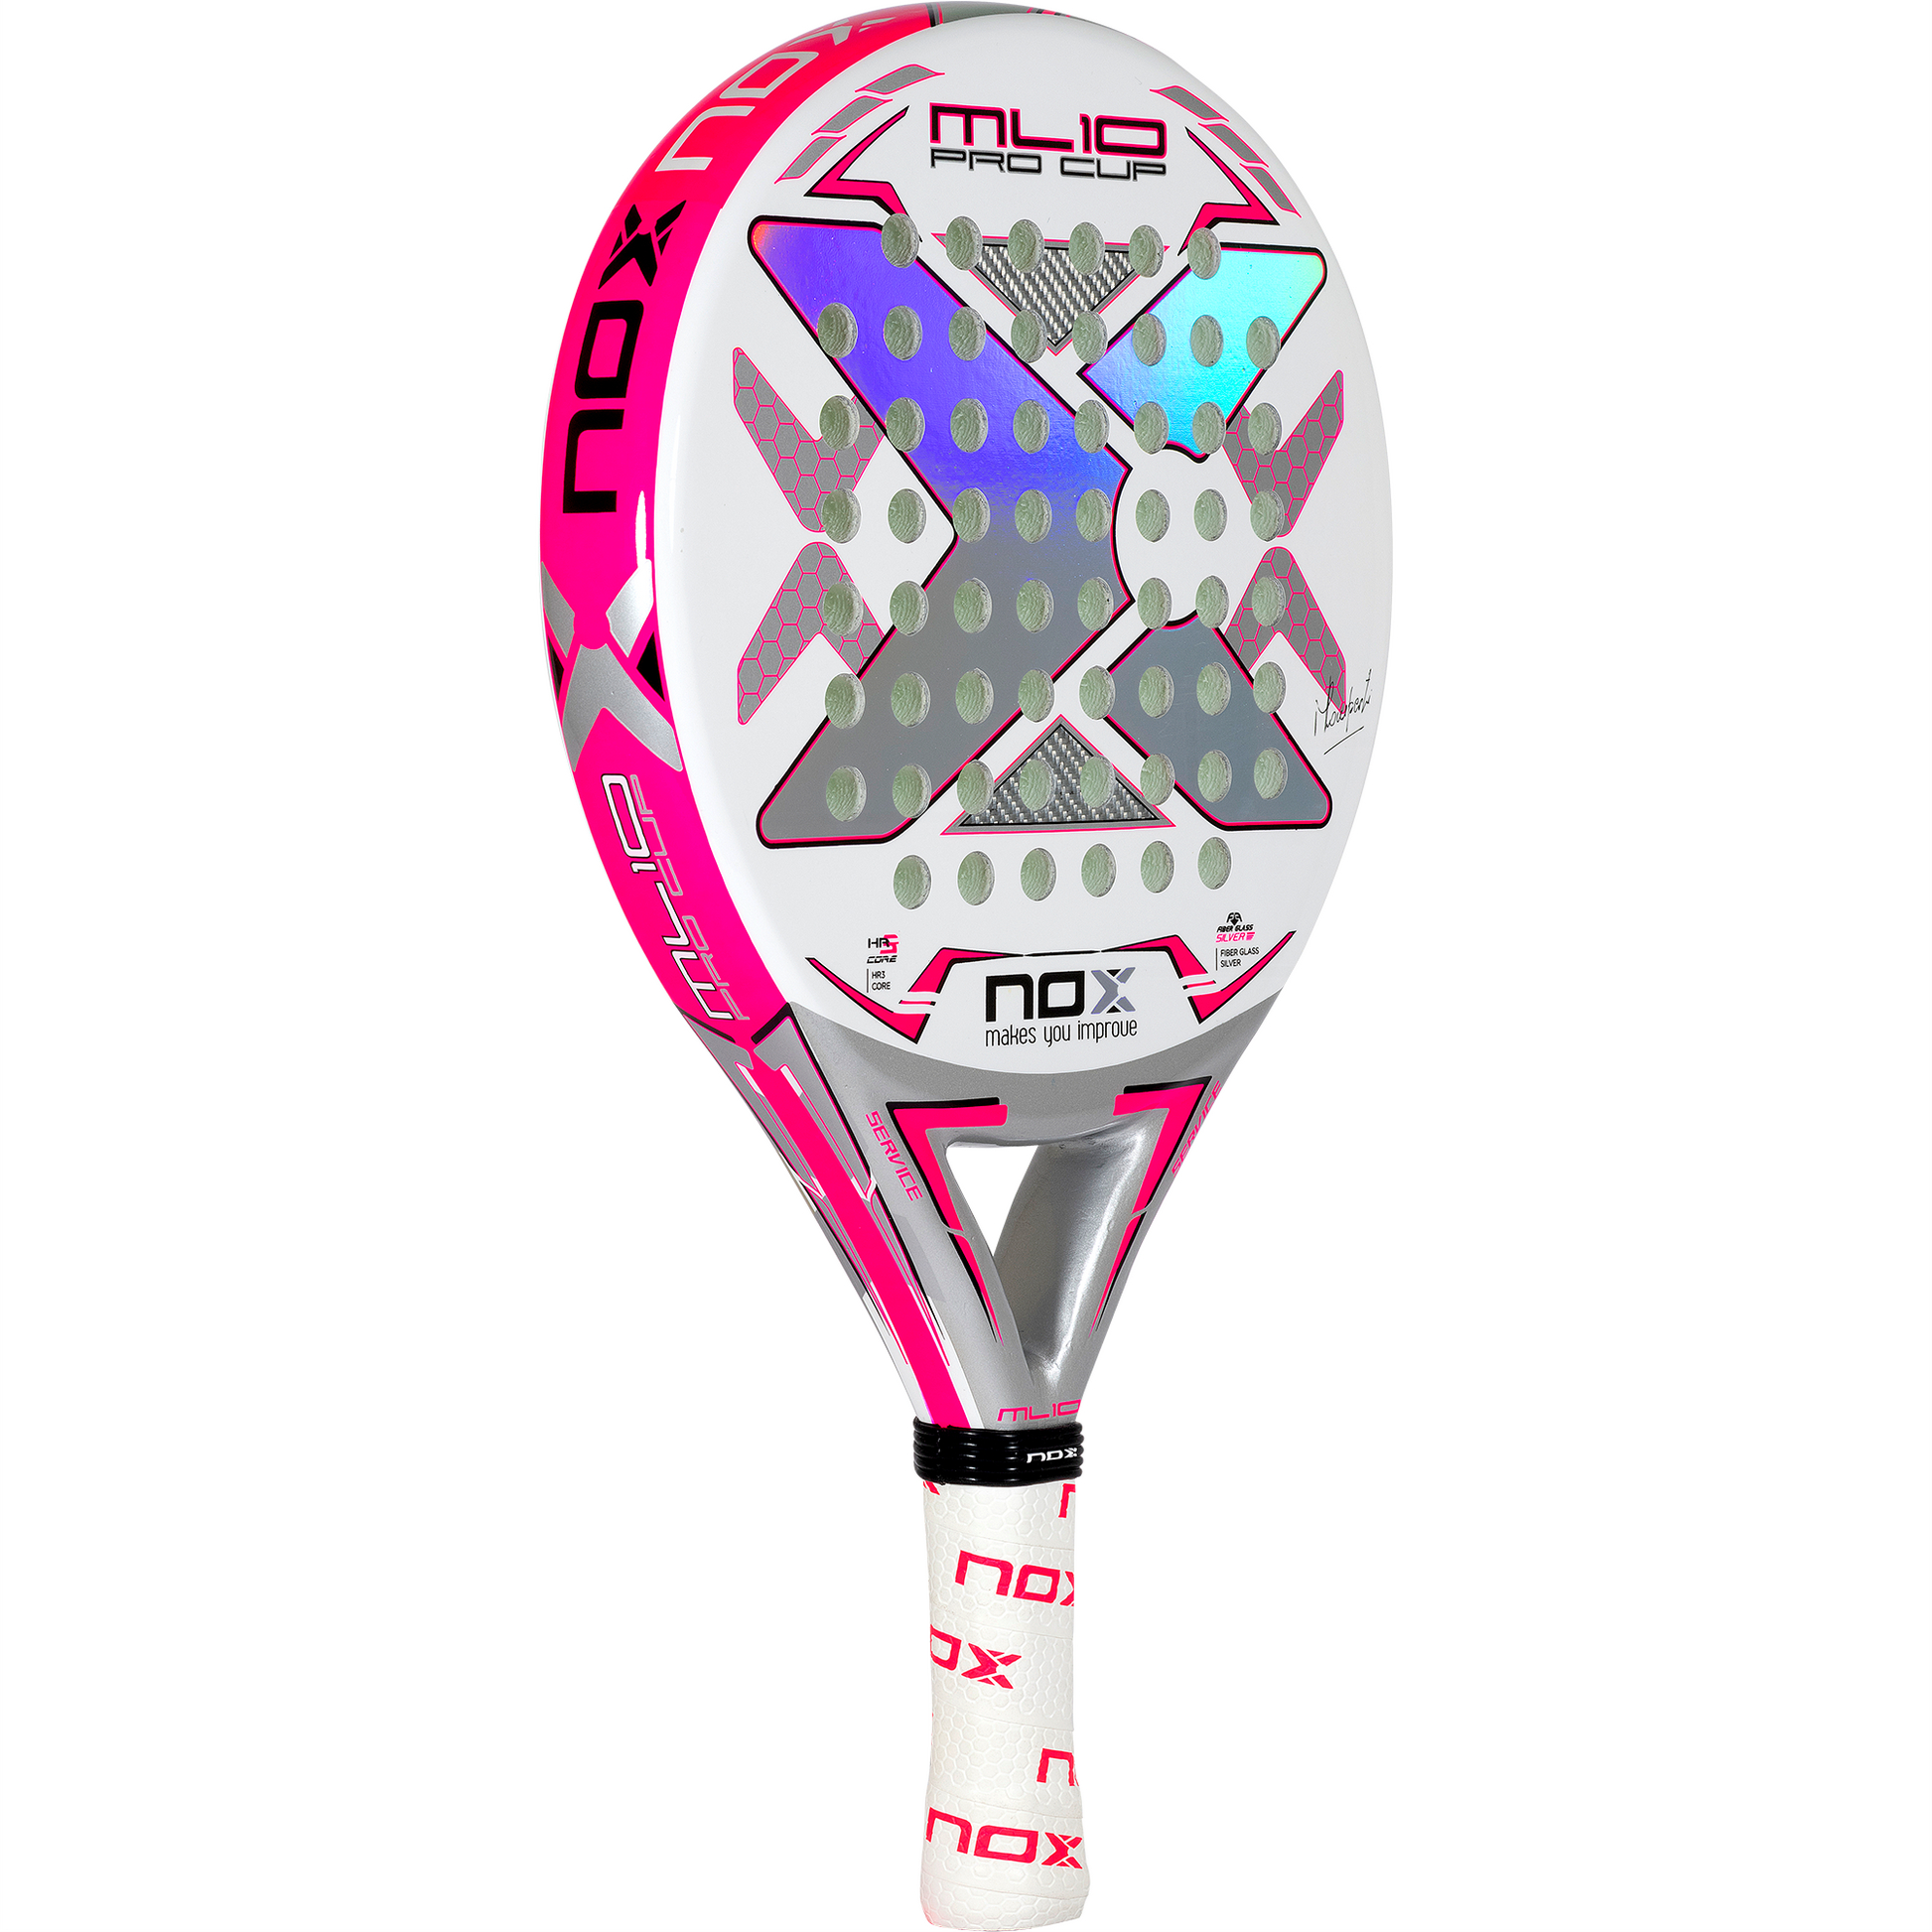 full racket view of the ML10 Pro Cup Silver Padel racket for sale from thepadelshop.co.nz